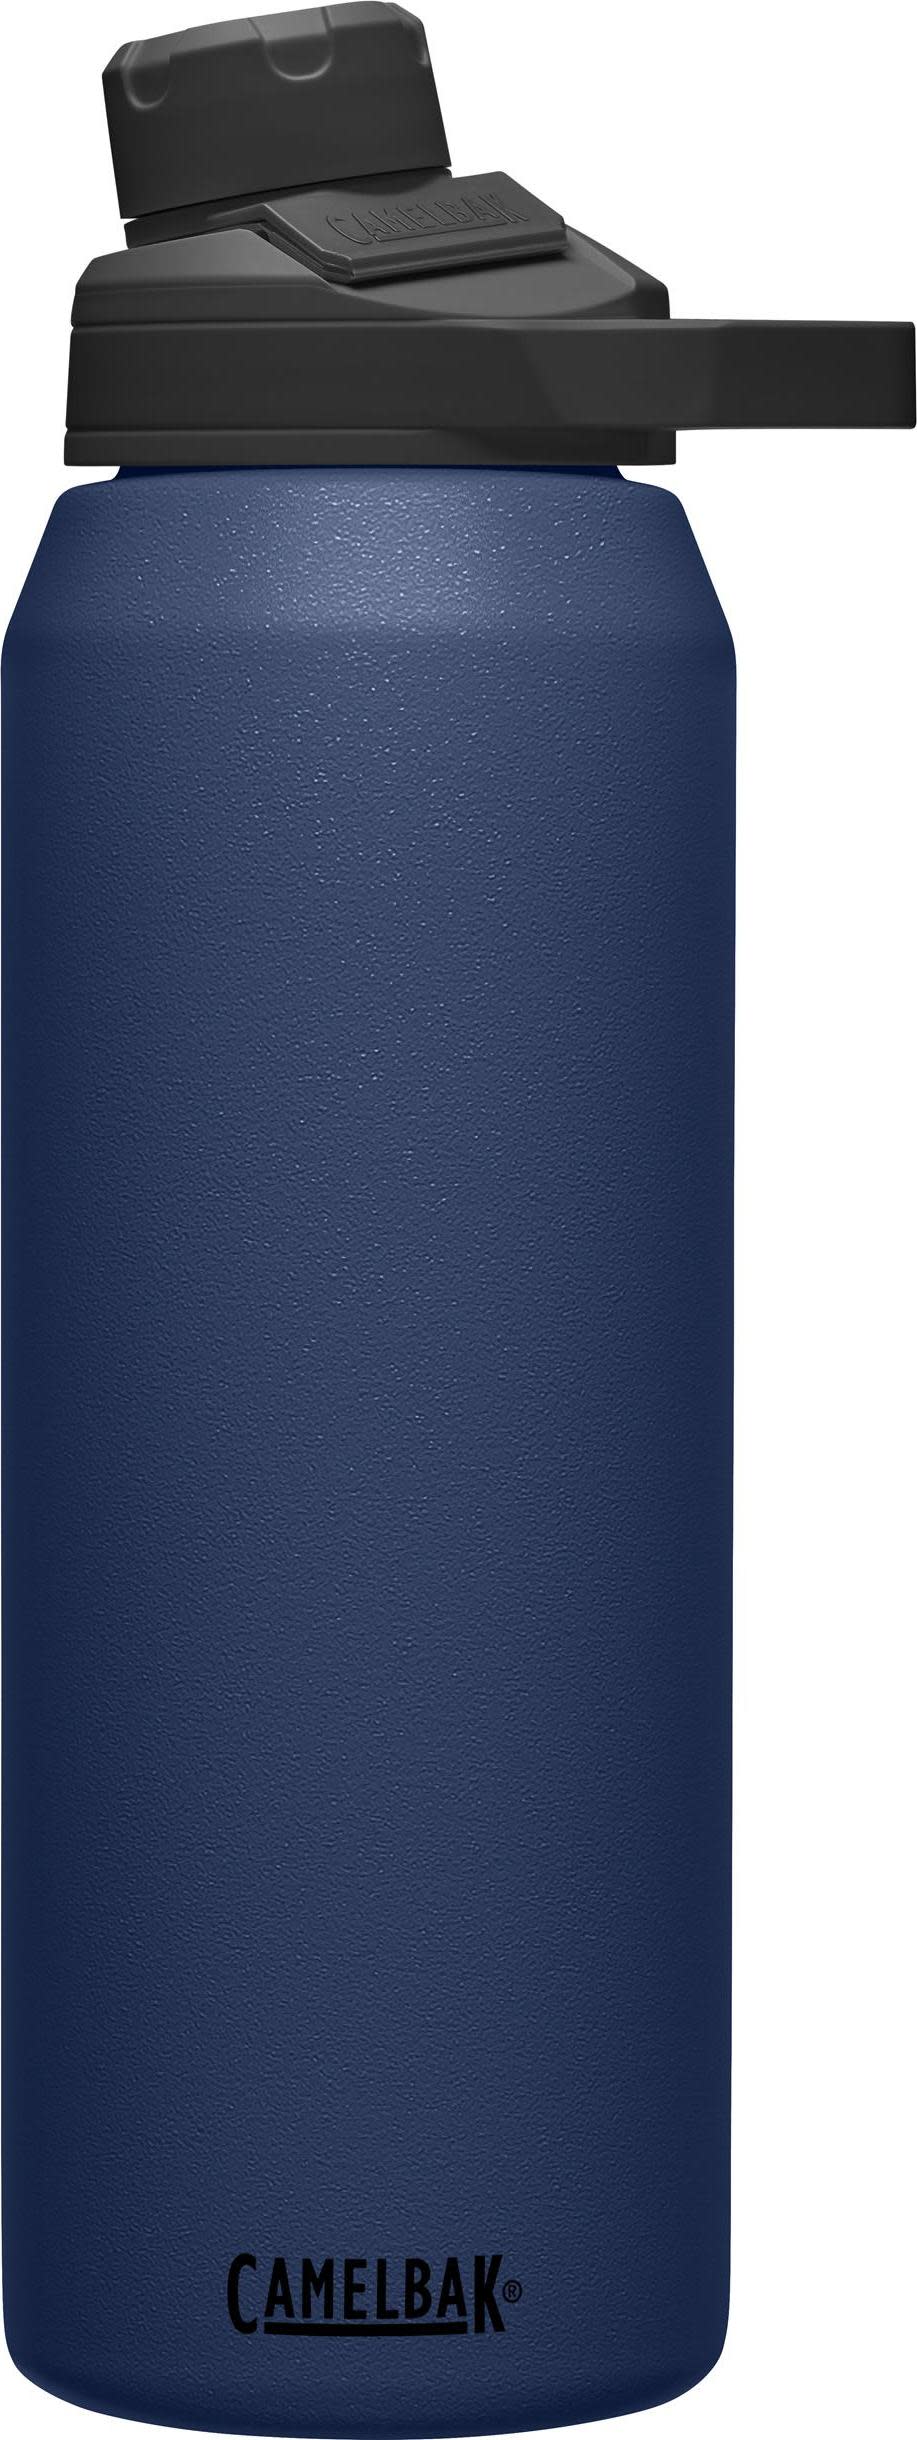 CamelBak Chute Mag 1L Vacuum Insulated Stainless Steel Navy